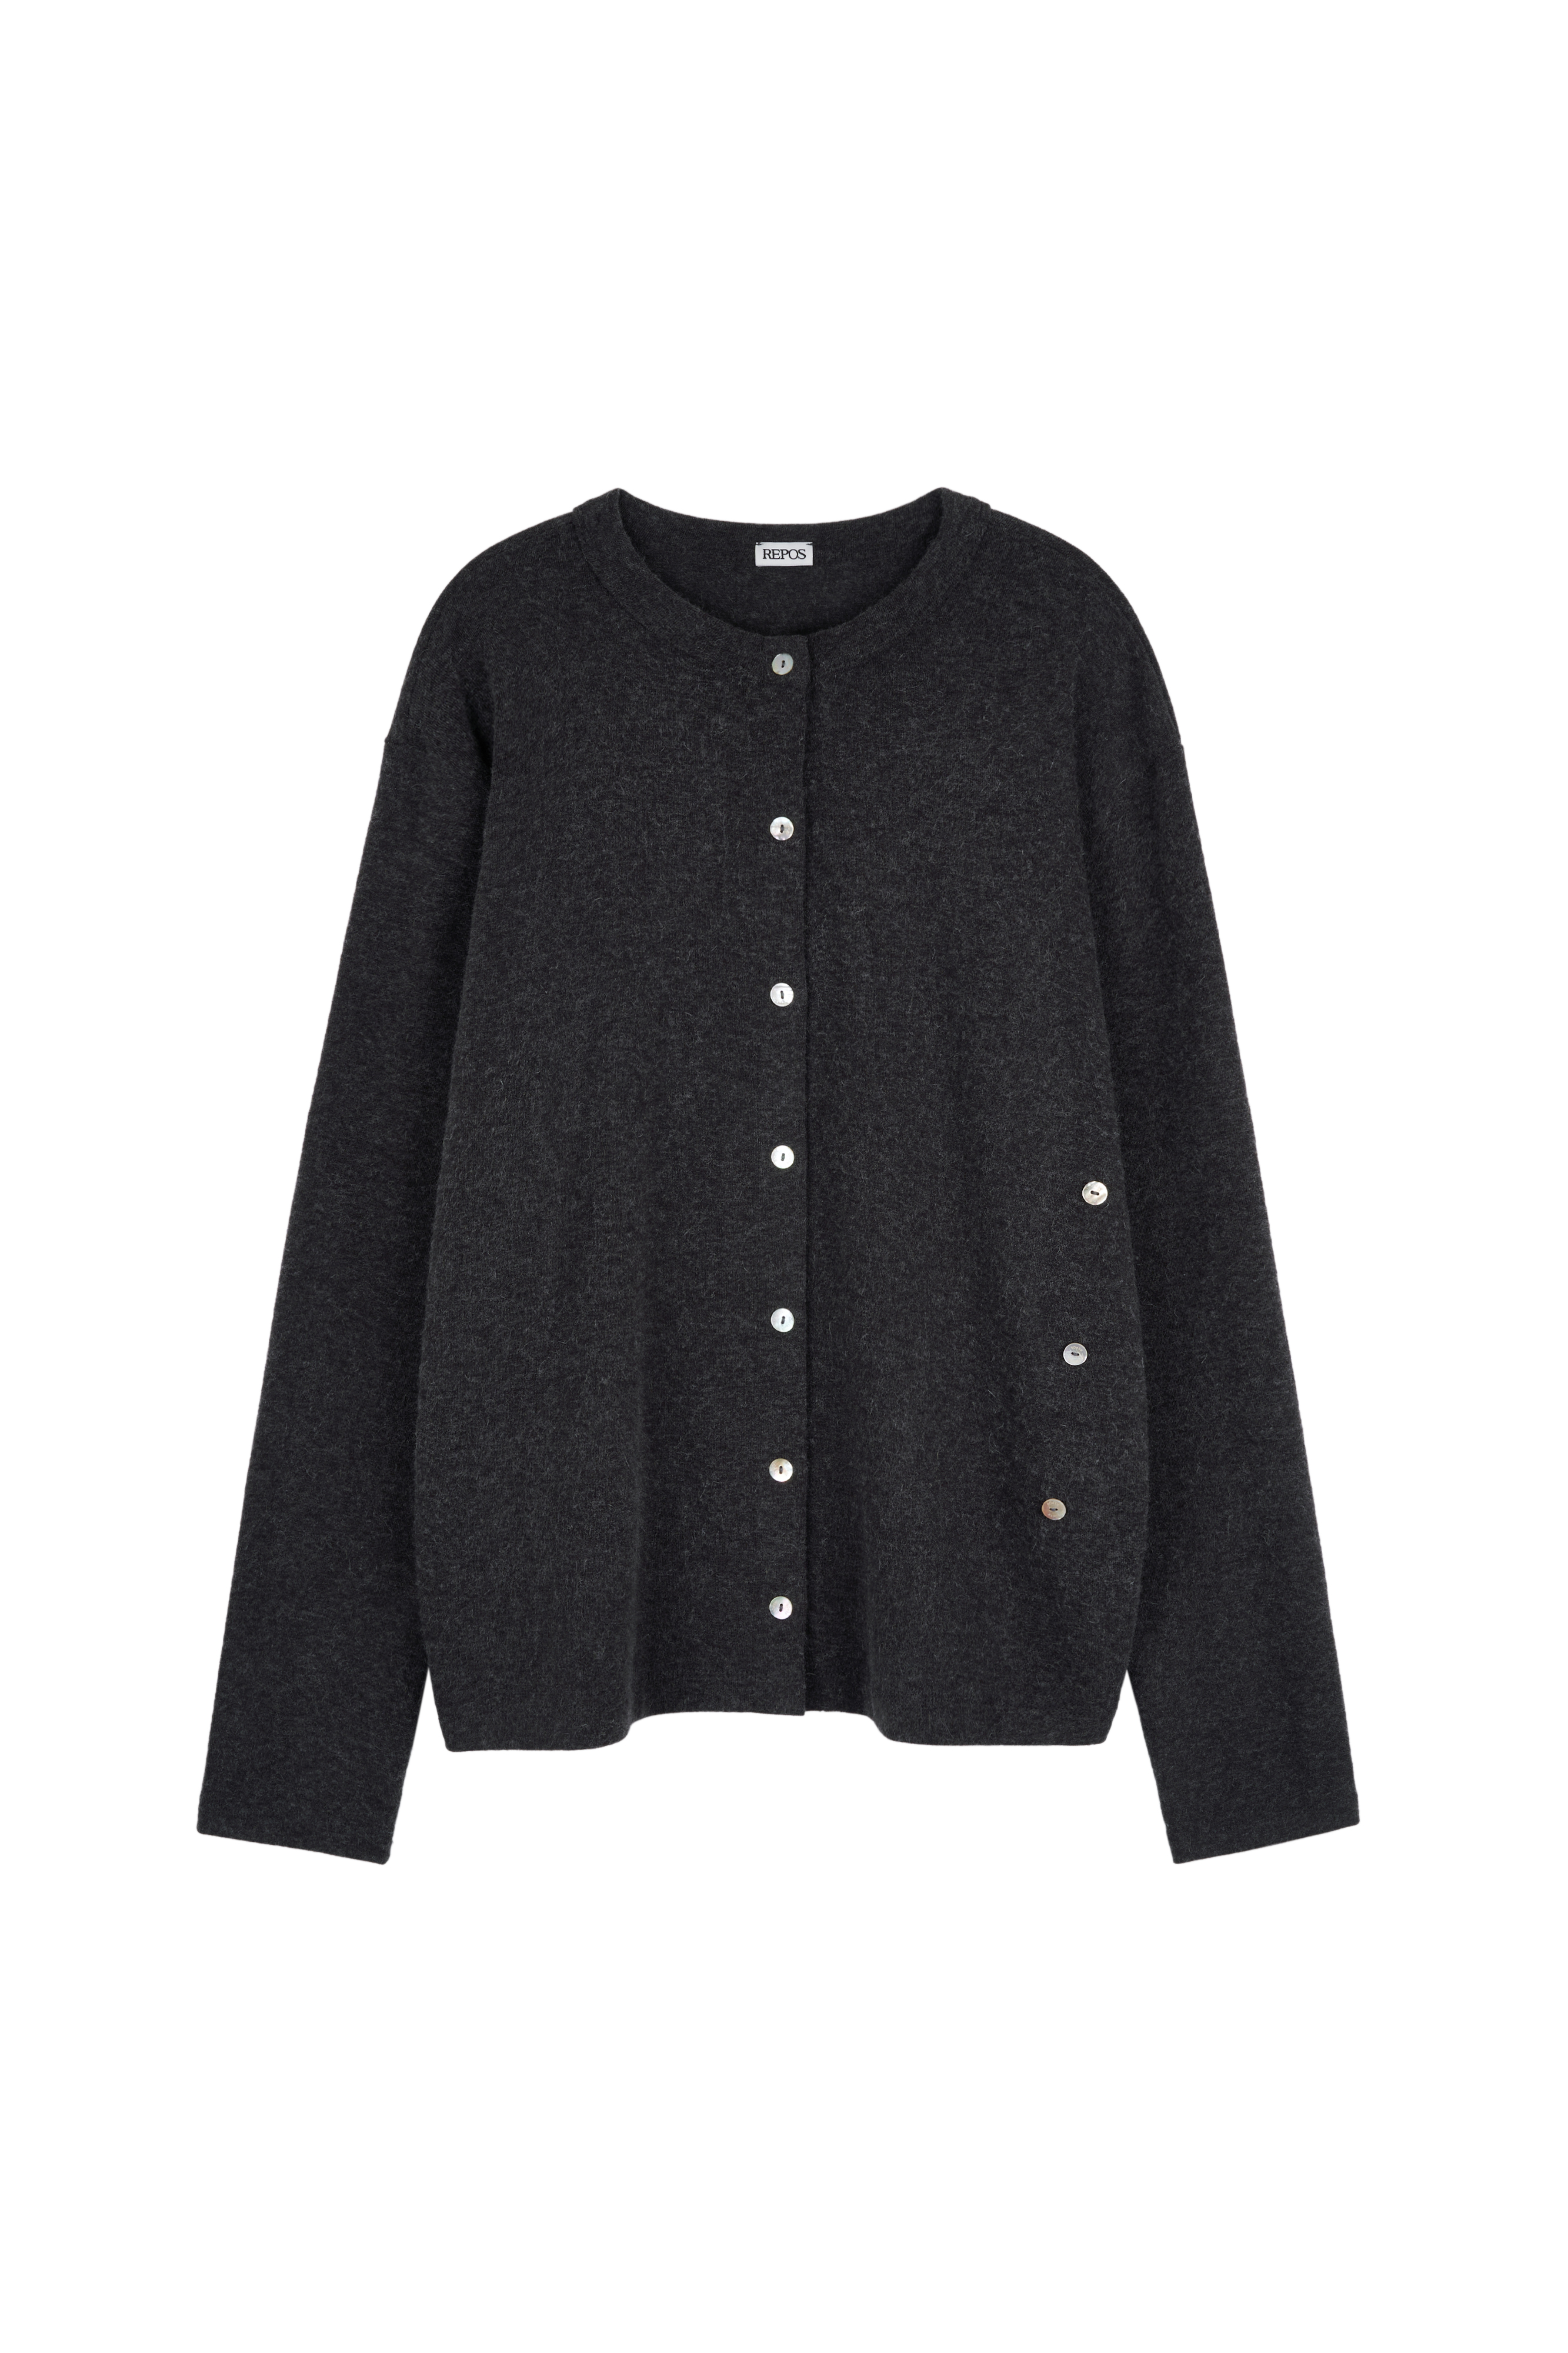 HOLIDAY BUTTON CARDIGAN (CHARCOAL)